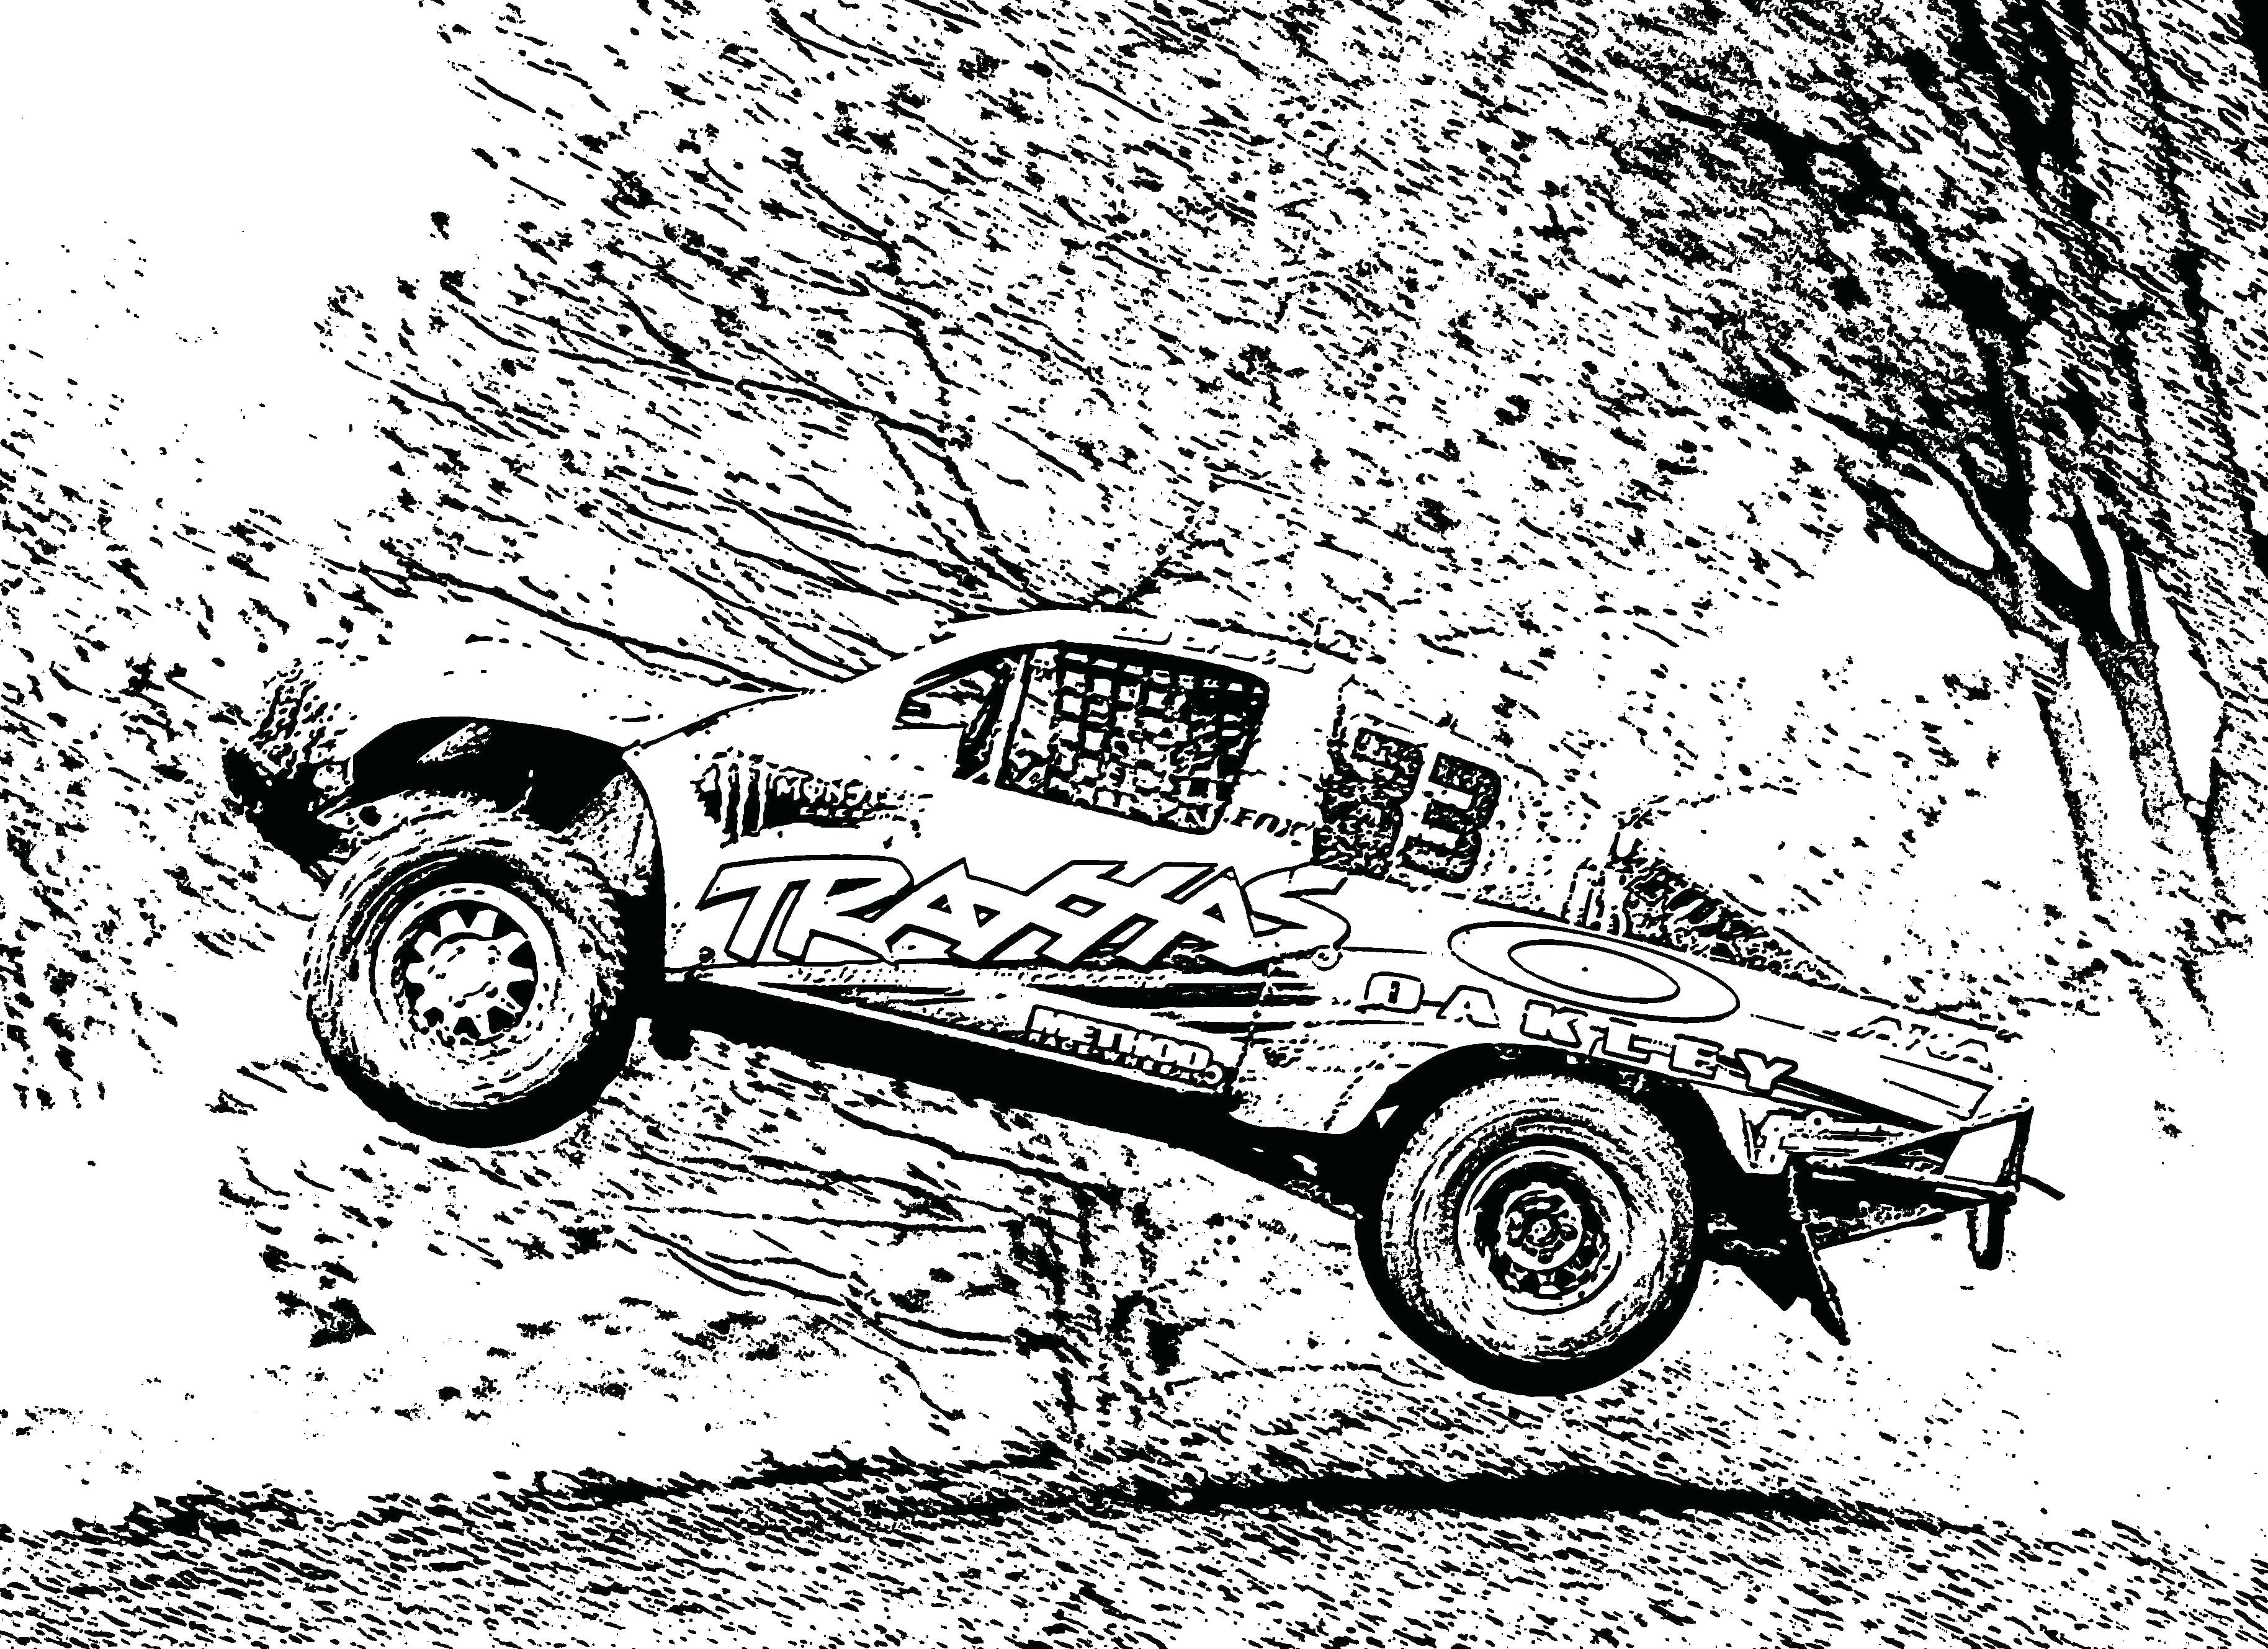 Coloring Page Of A Race Car Soar Racing Car Colouring Coloring Pages Free Printable Race Carring